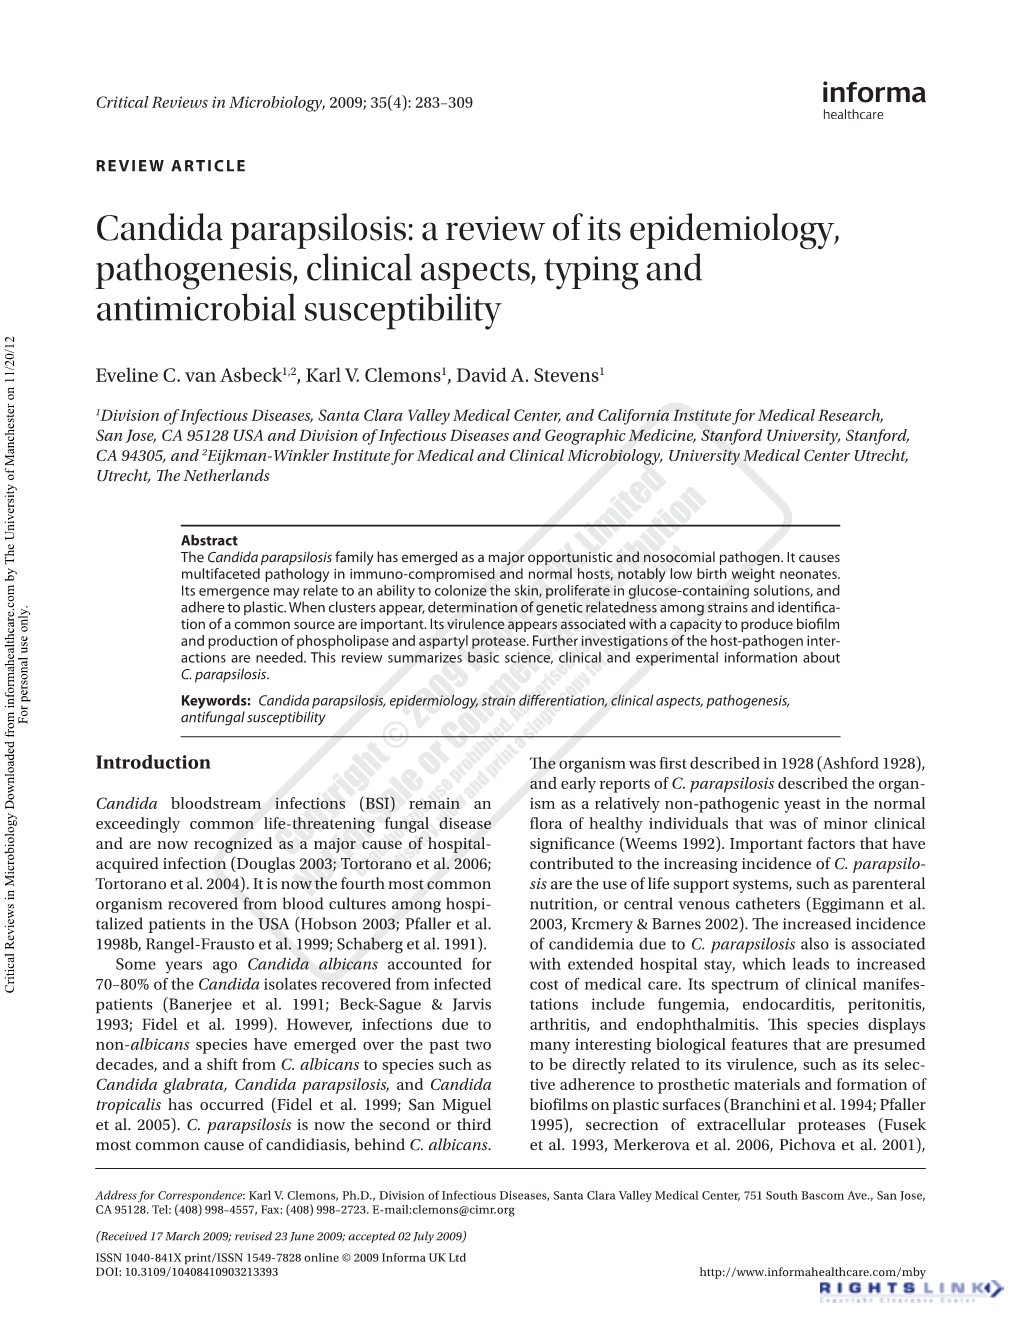 Candida Parapsilosis: a Review of Its Epidemiology, Pathogenesis, Clinical Aspects, Typing and Antimicrobial Susceptibility